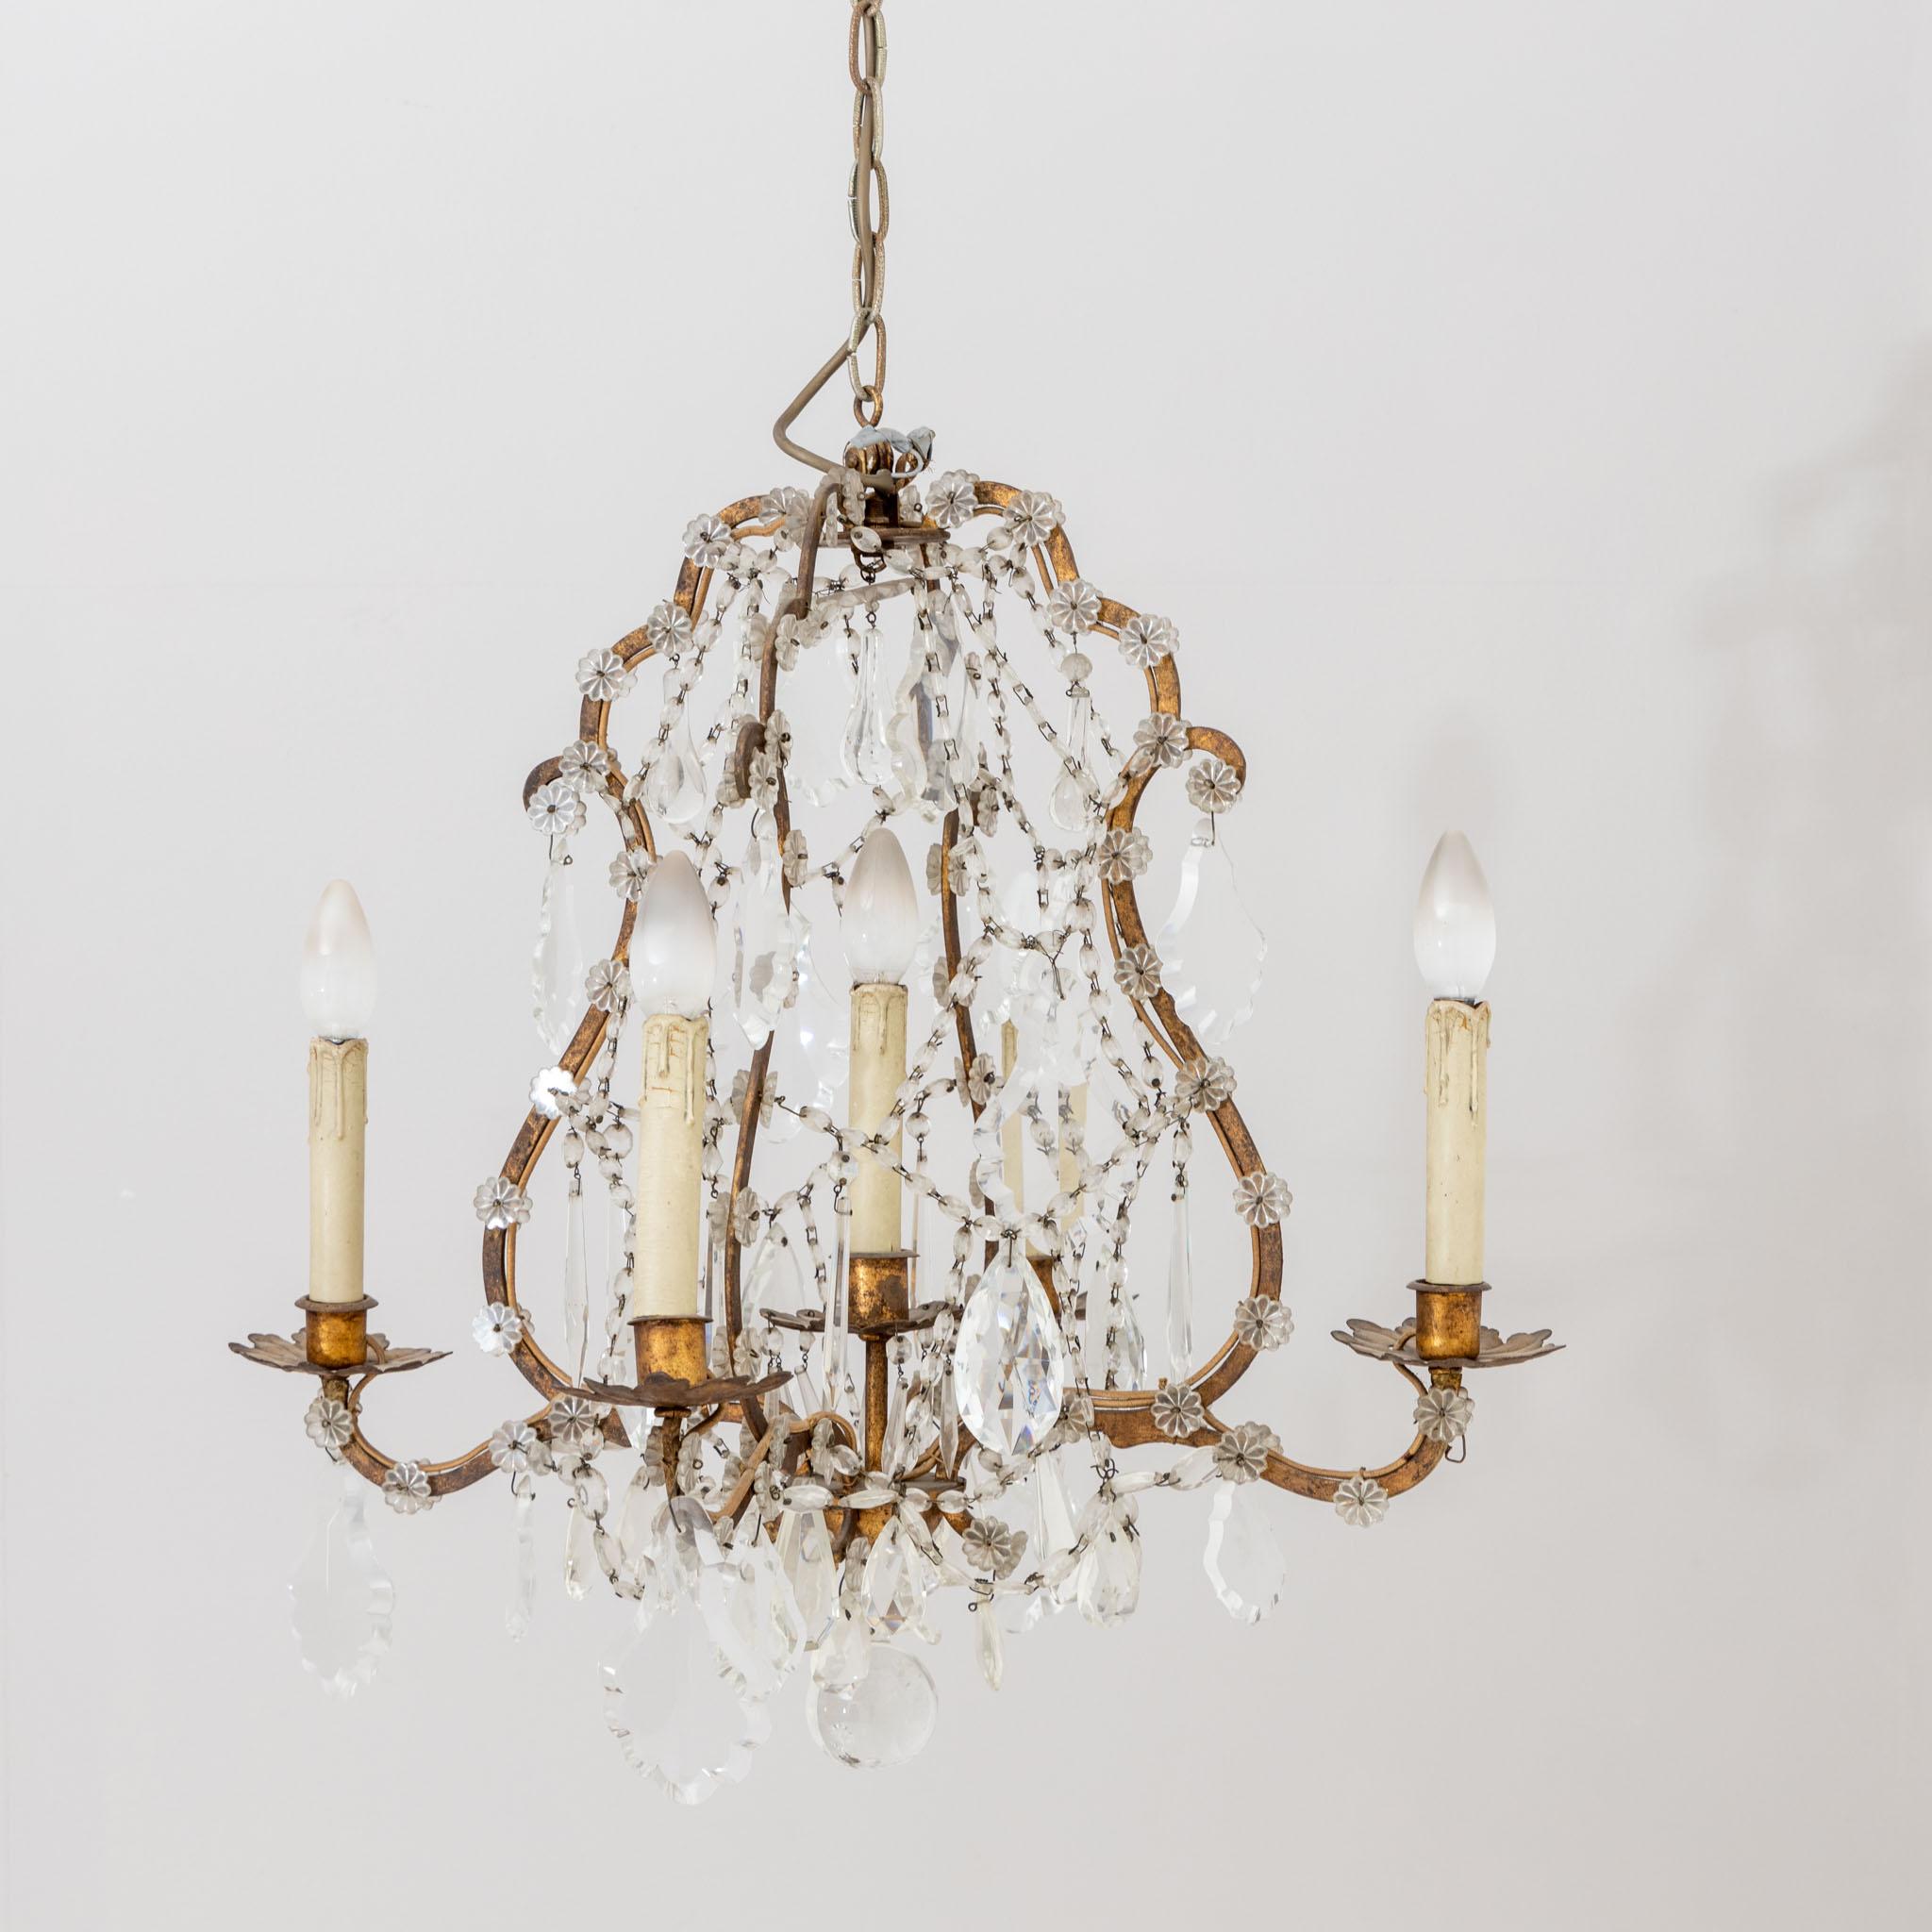 Baroque Revival Chandelier with five Sockets and Glass Prisms, 1st Half 20th Century For Sale